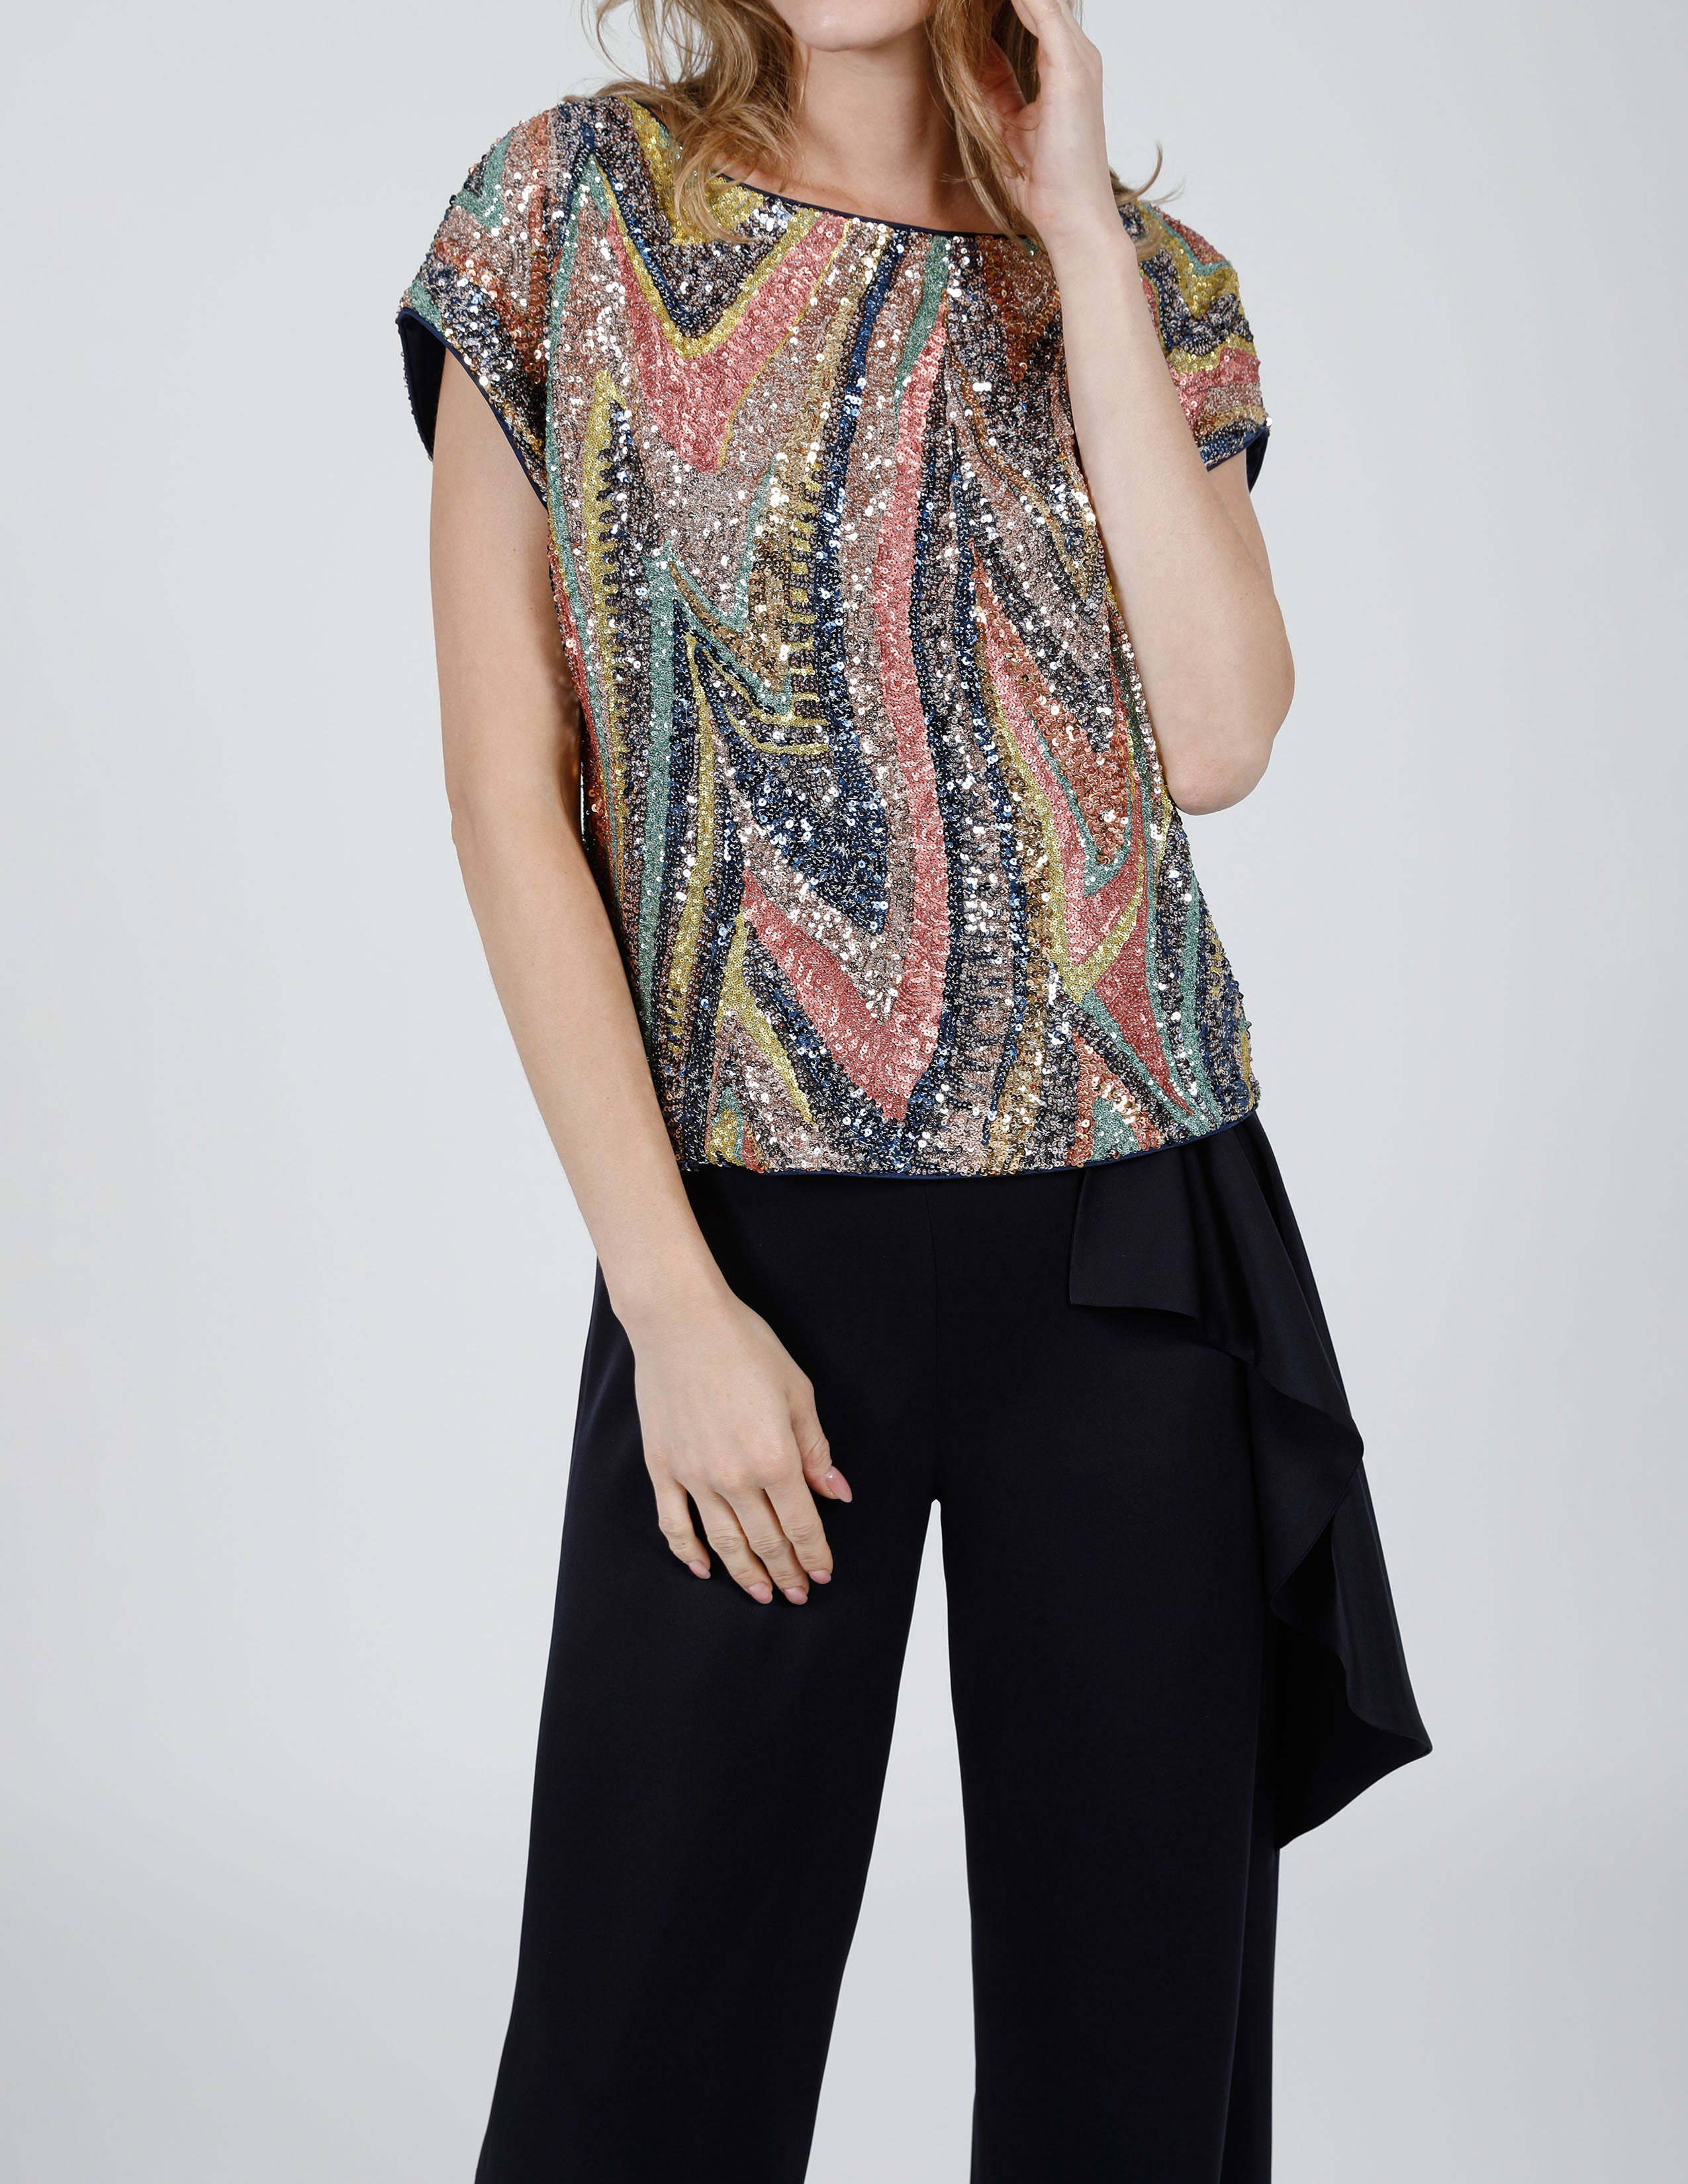 MOULIN ROUGE SEQUINED TOP - SHIPS 3.31